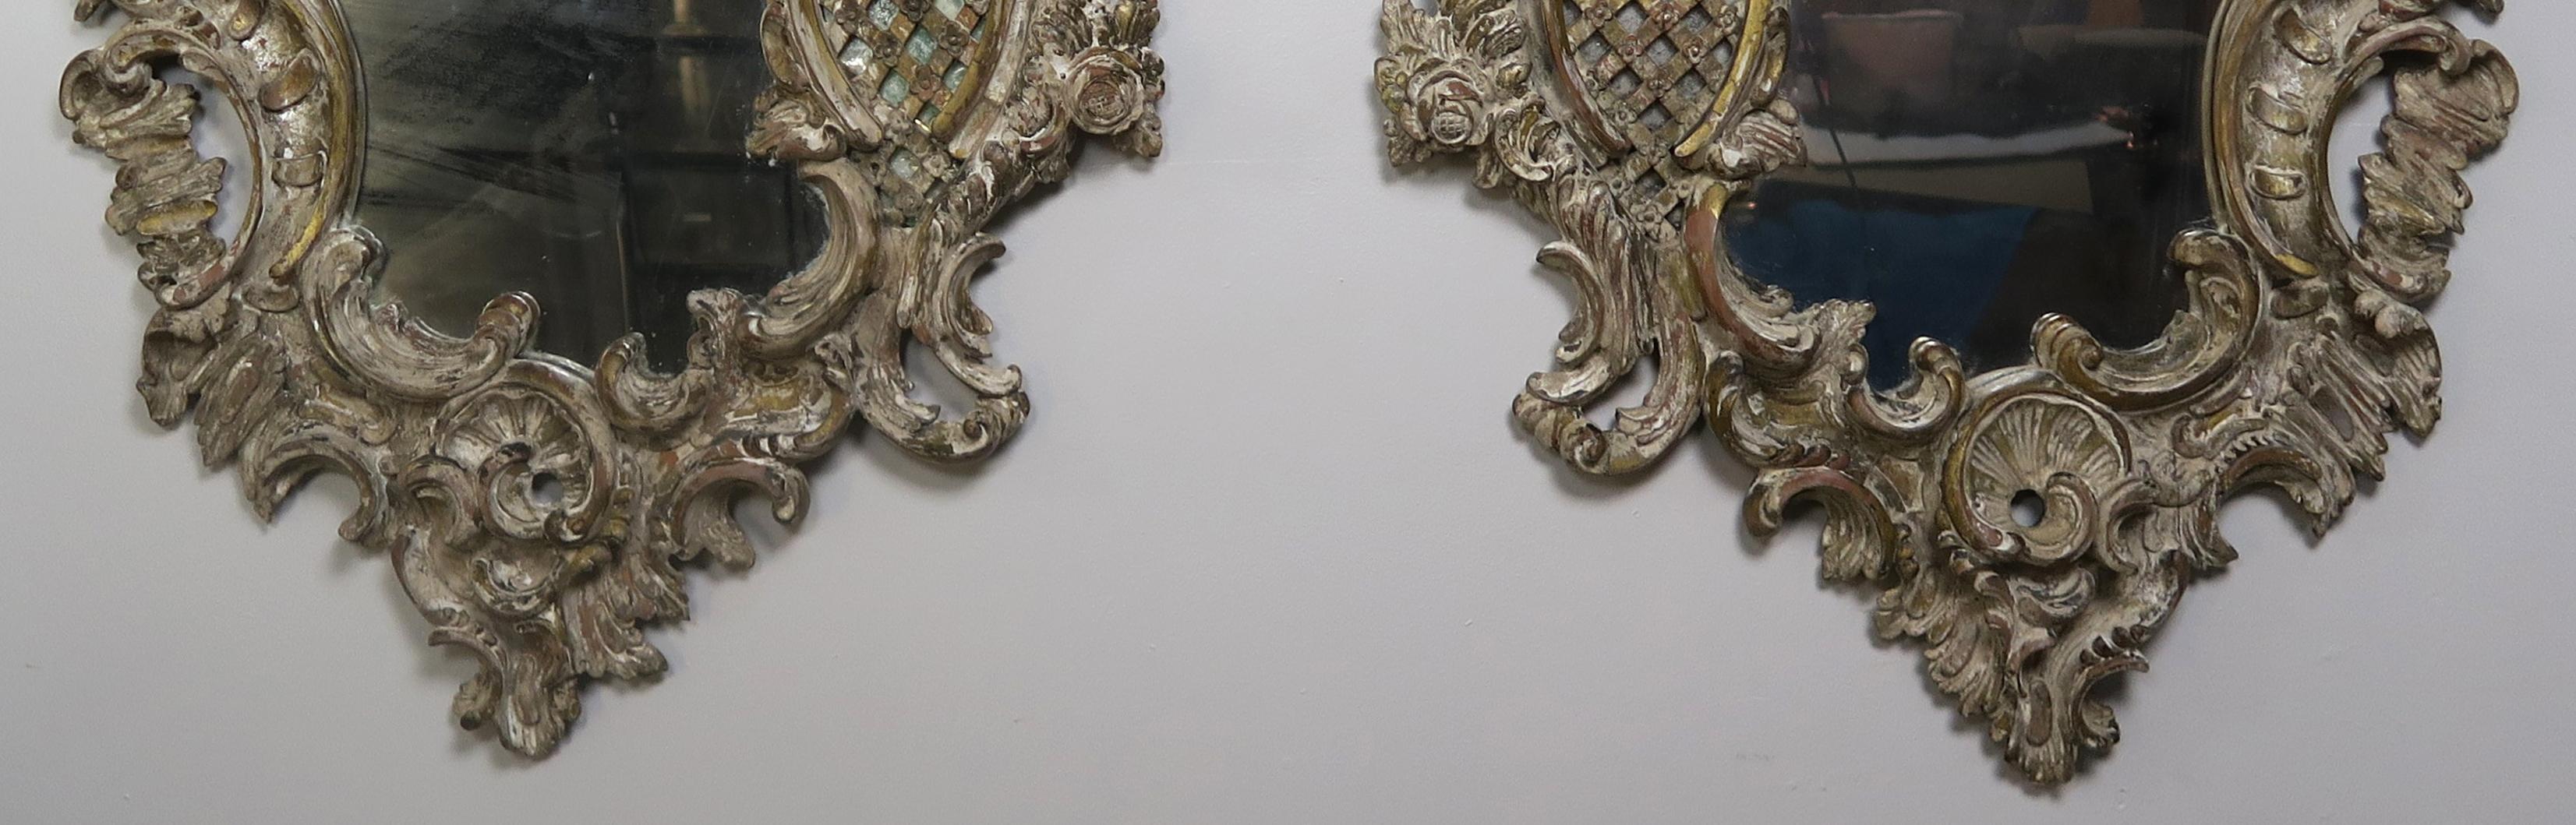 20th Century Pair of 19th Century Rococo Style Italian Carved Mirrors with Cherubs